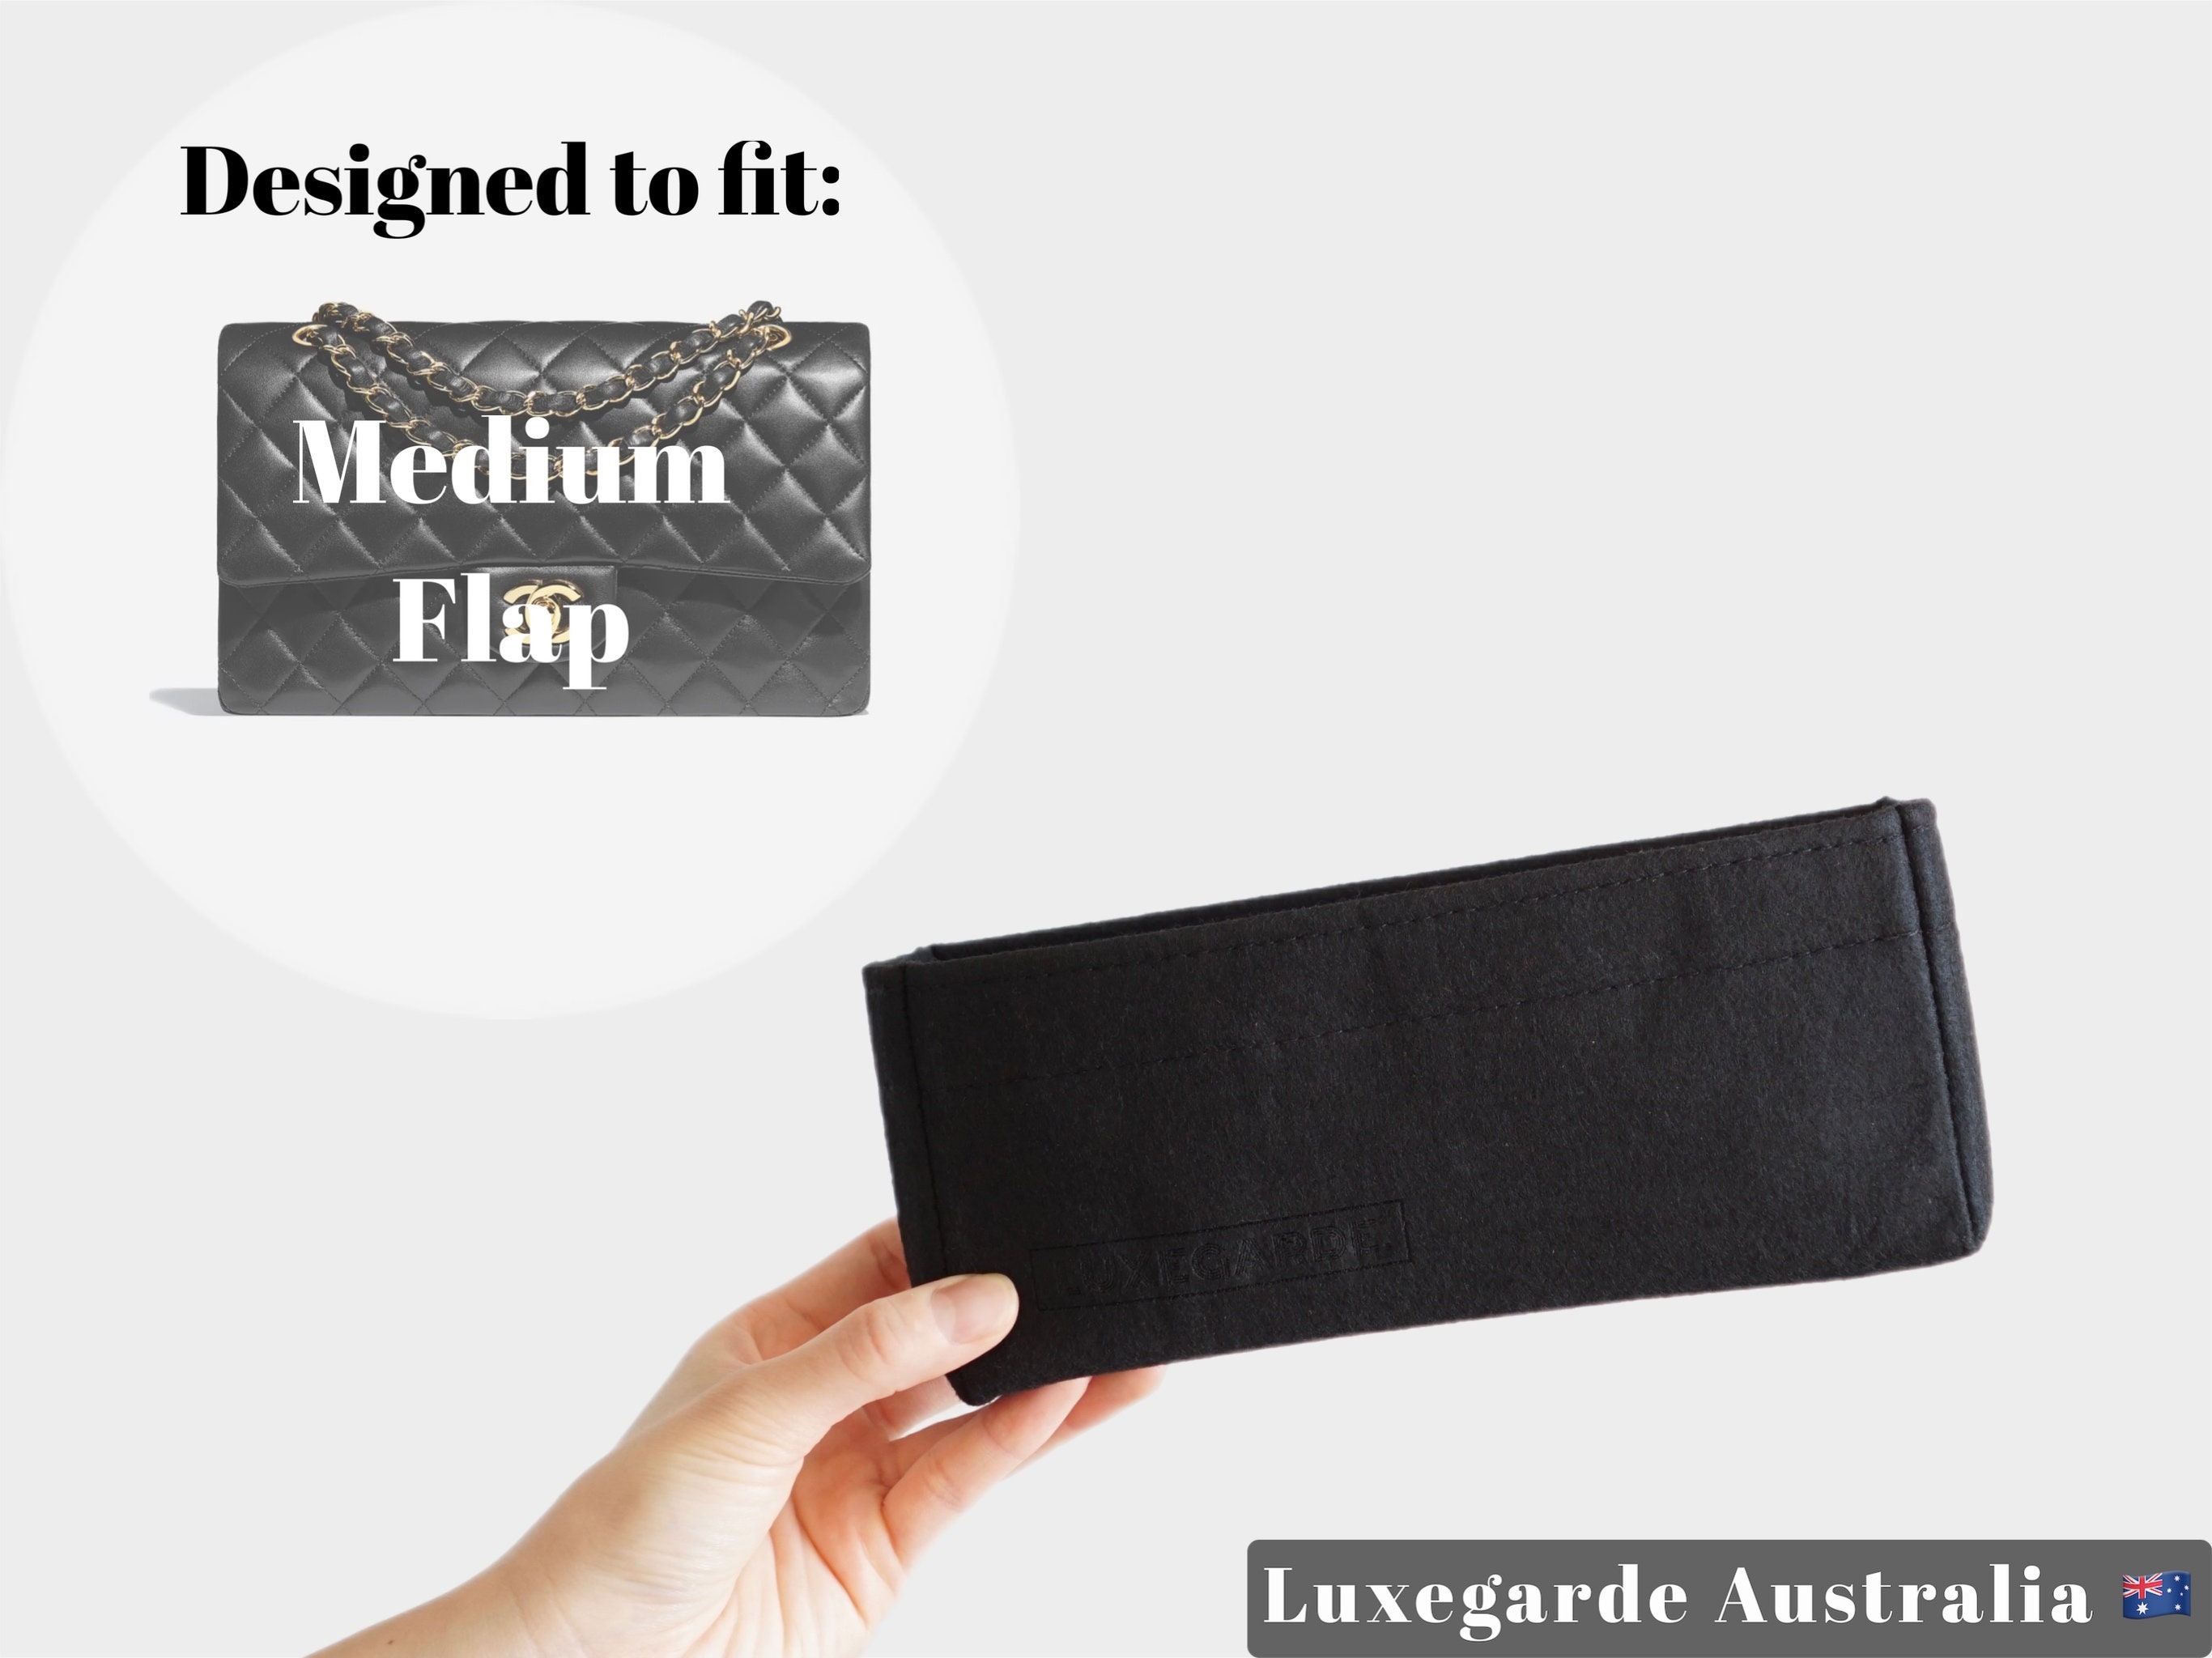 Conversion Kit For Chanel Classic Long Flap Wallet Insert+Cowhide